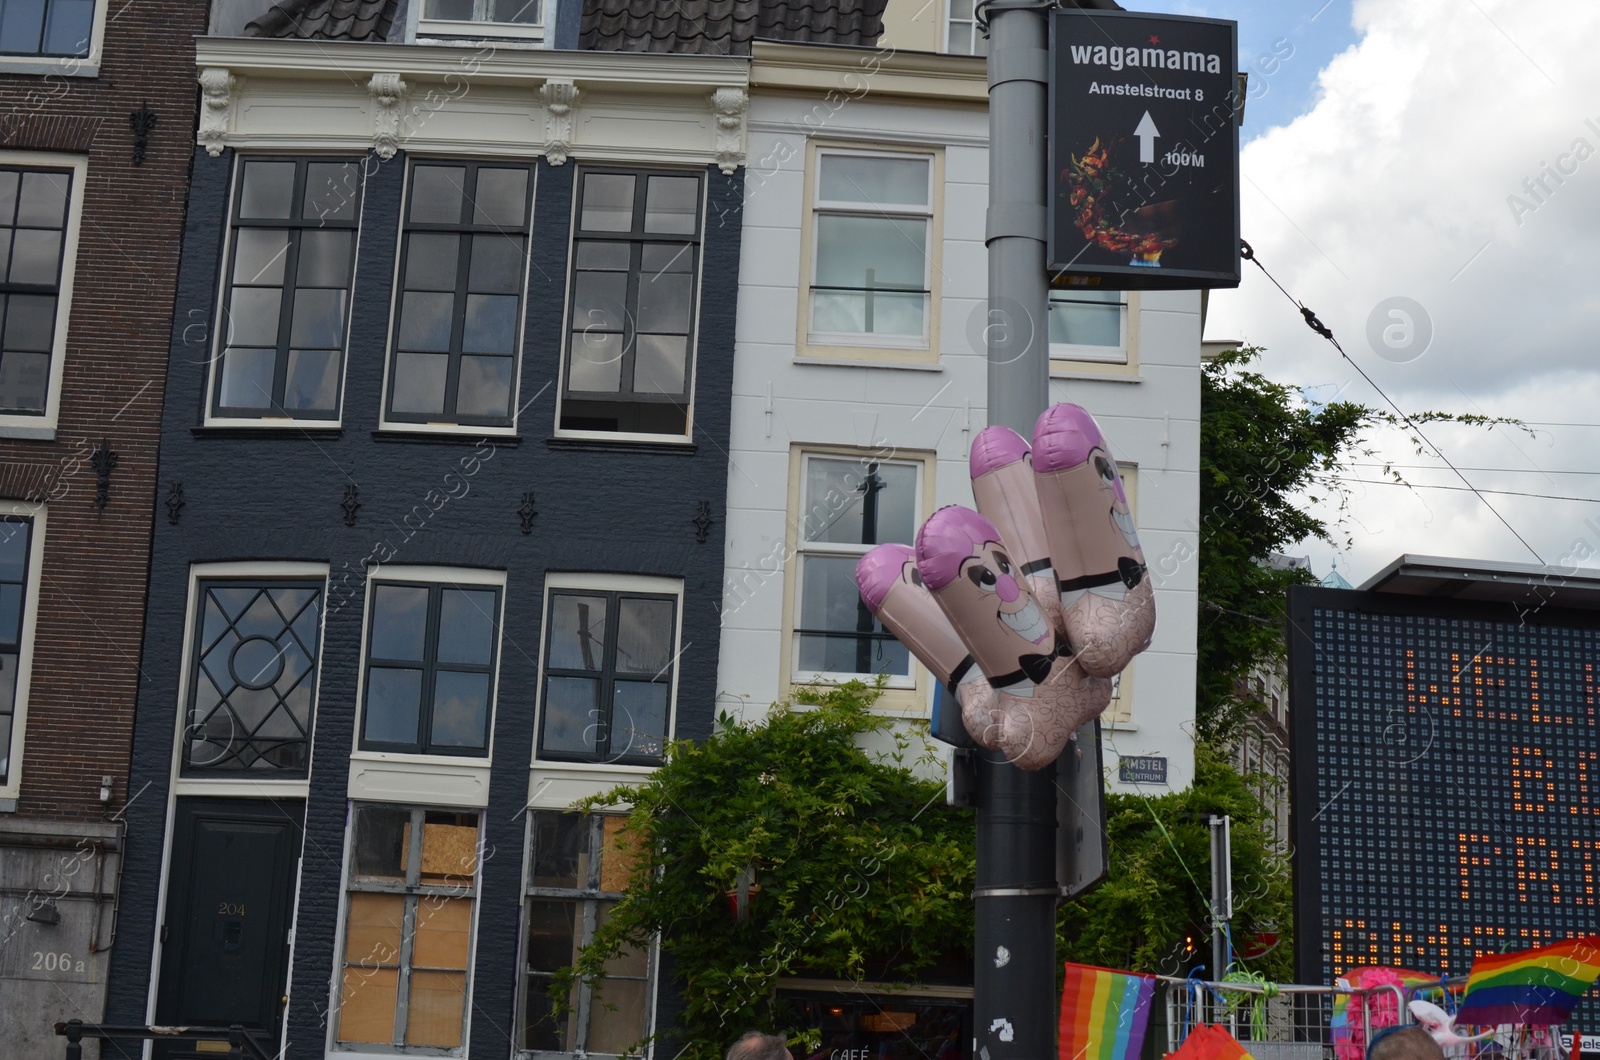 Photo of AMSTERDAM, NETHERLANDS - AUGUST 06, 2022: Male sexual organ shaped balloons at LGBT pride parade on city street